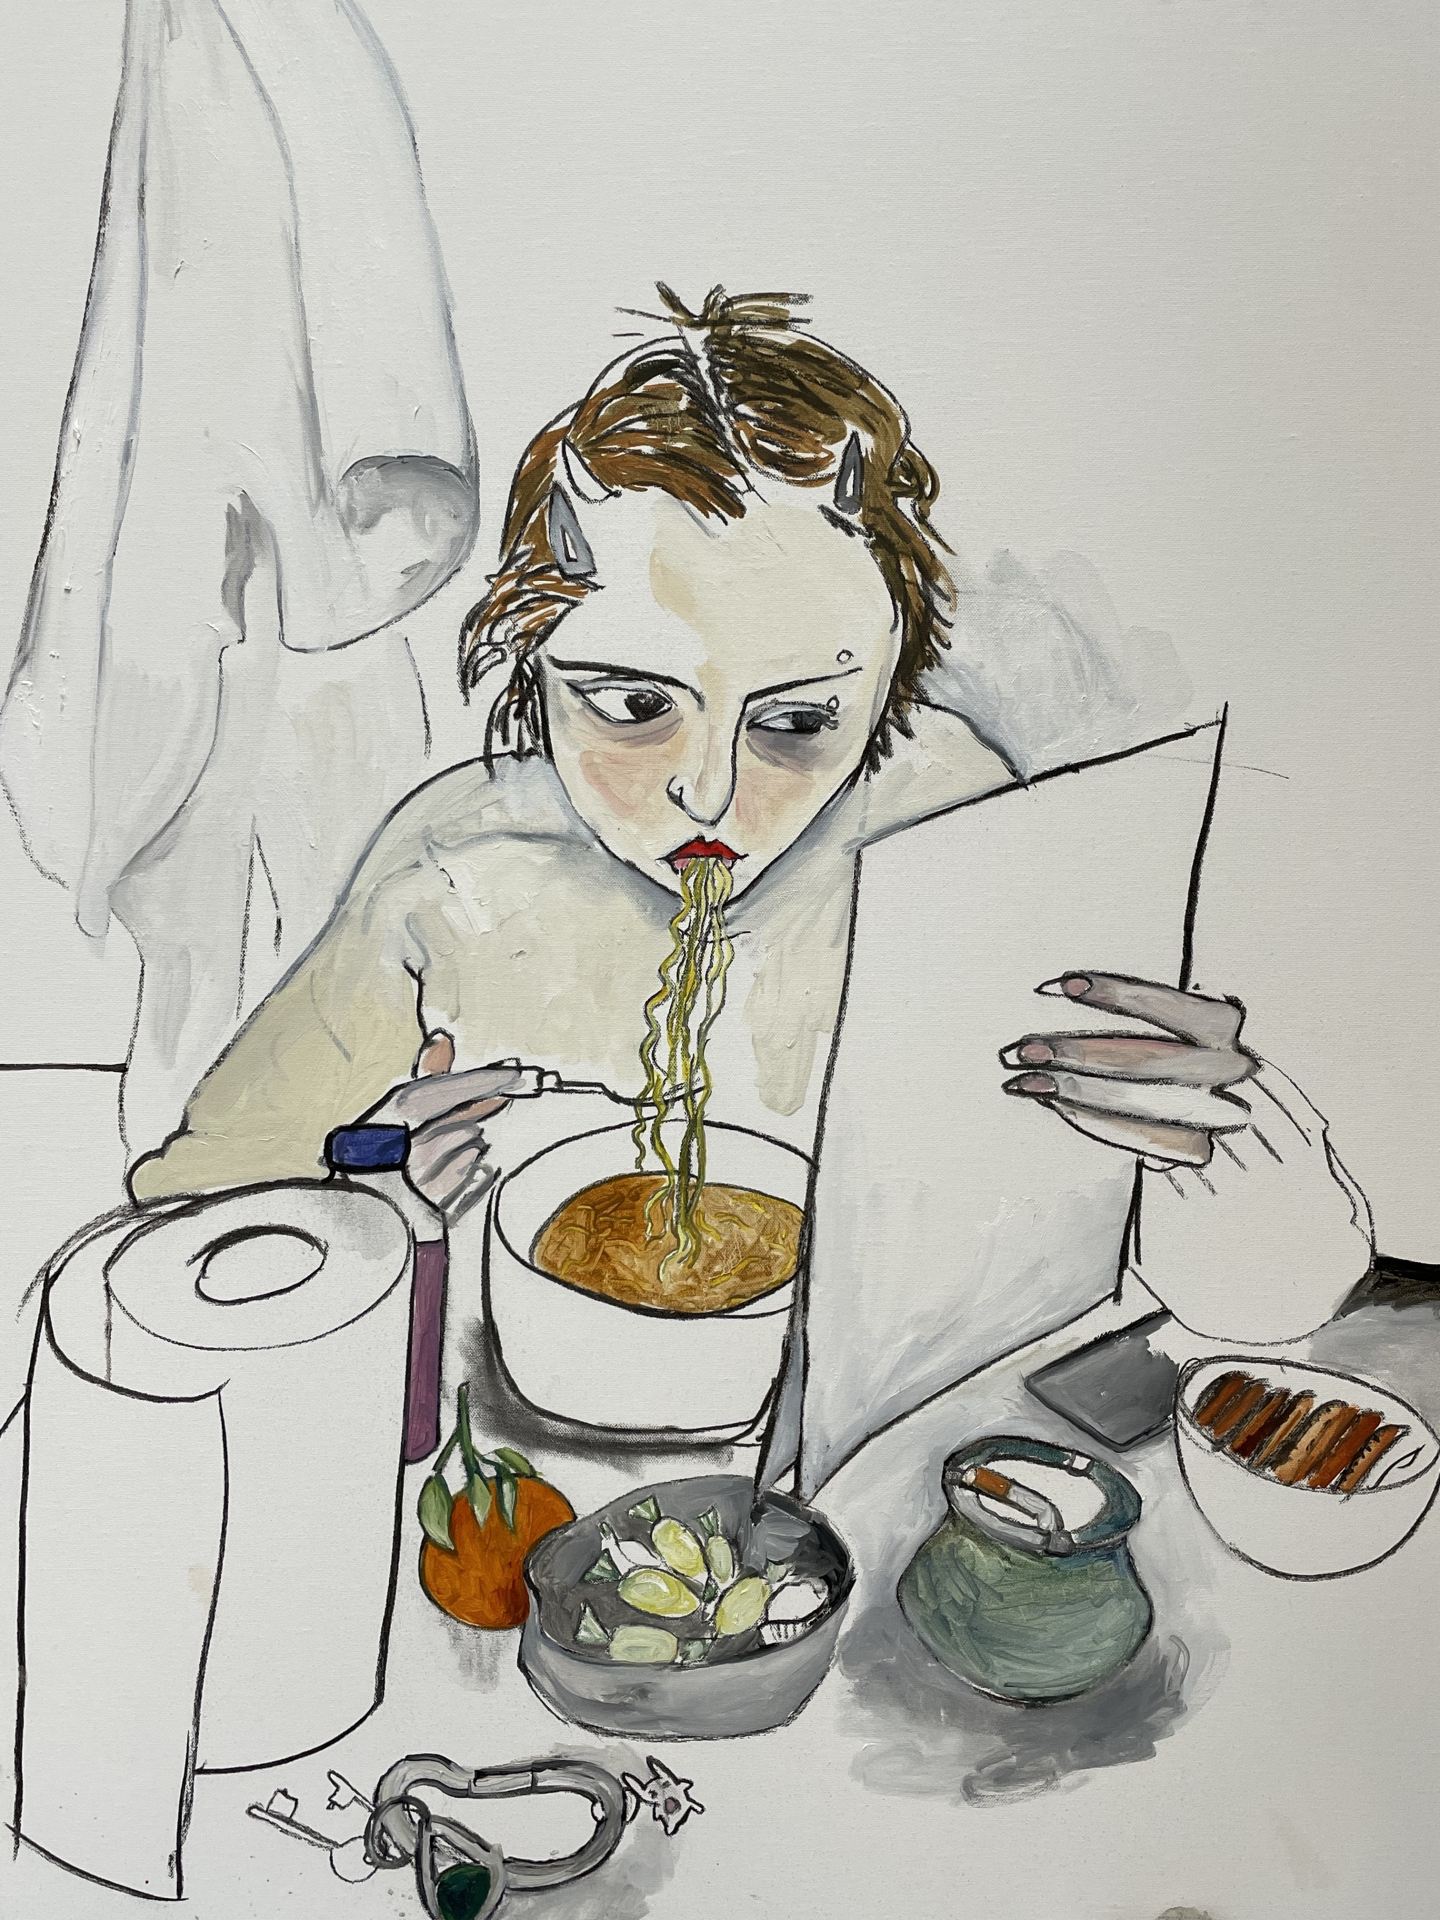 A painting of a person eating noodles and reading at a dining table.